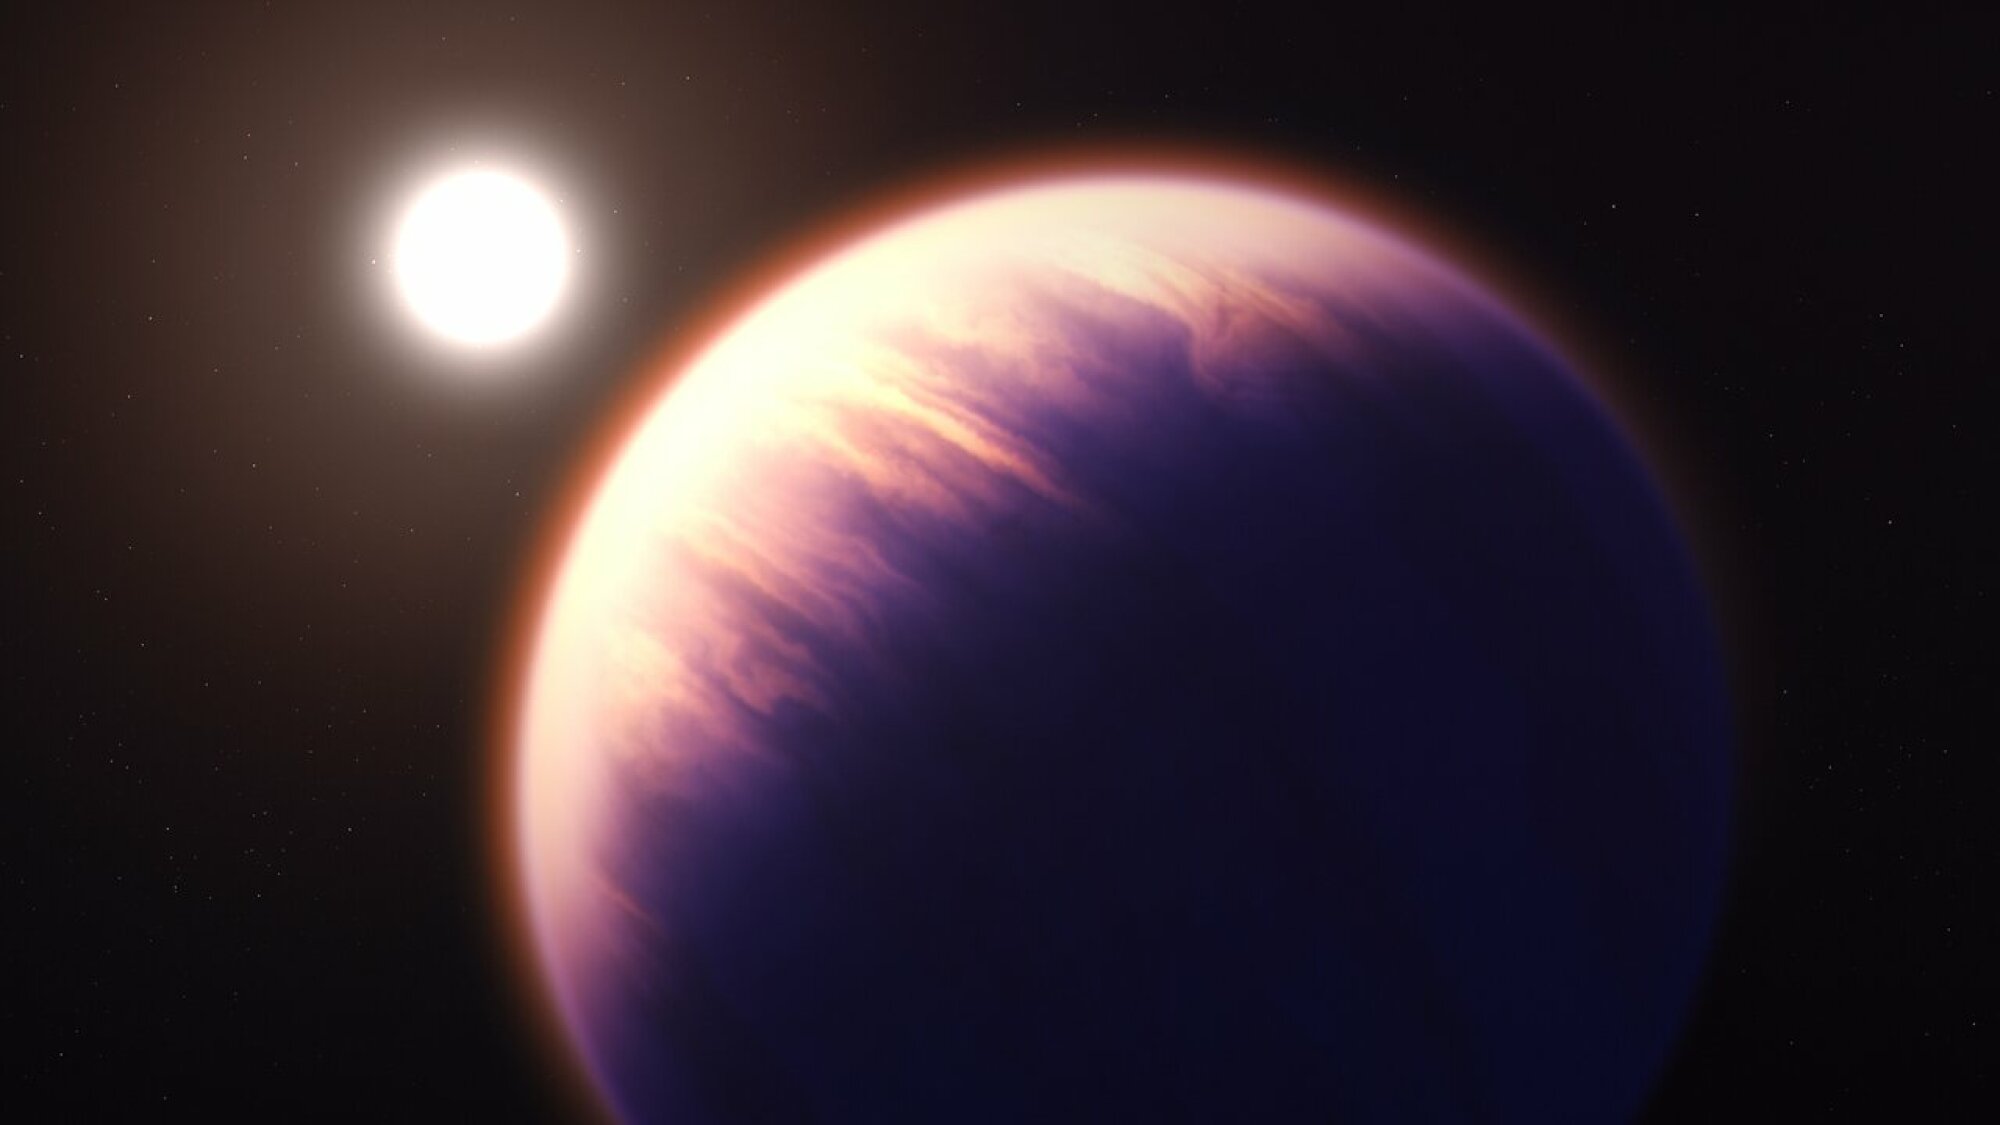 A giant gassy planet with a star in the background